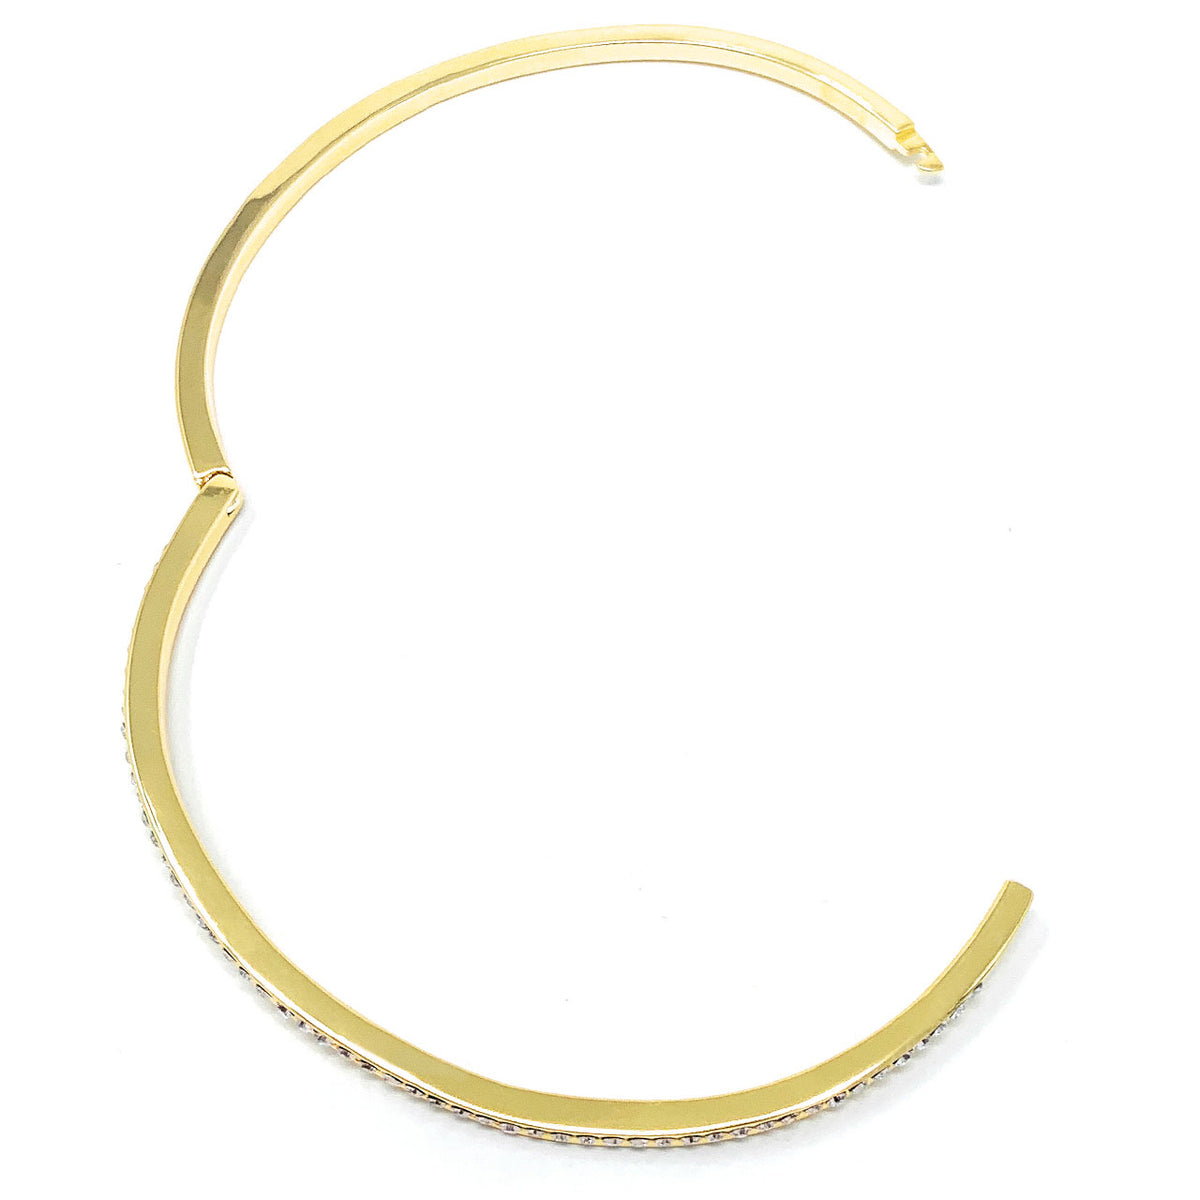 Amelia Curve Pave Bangle Bracelet with White Clear Round Crystals from Swarovski Gold Plated - Ed Heart